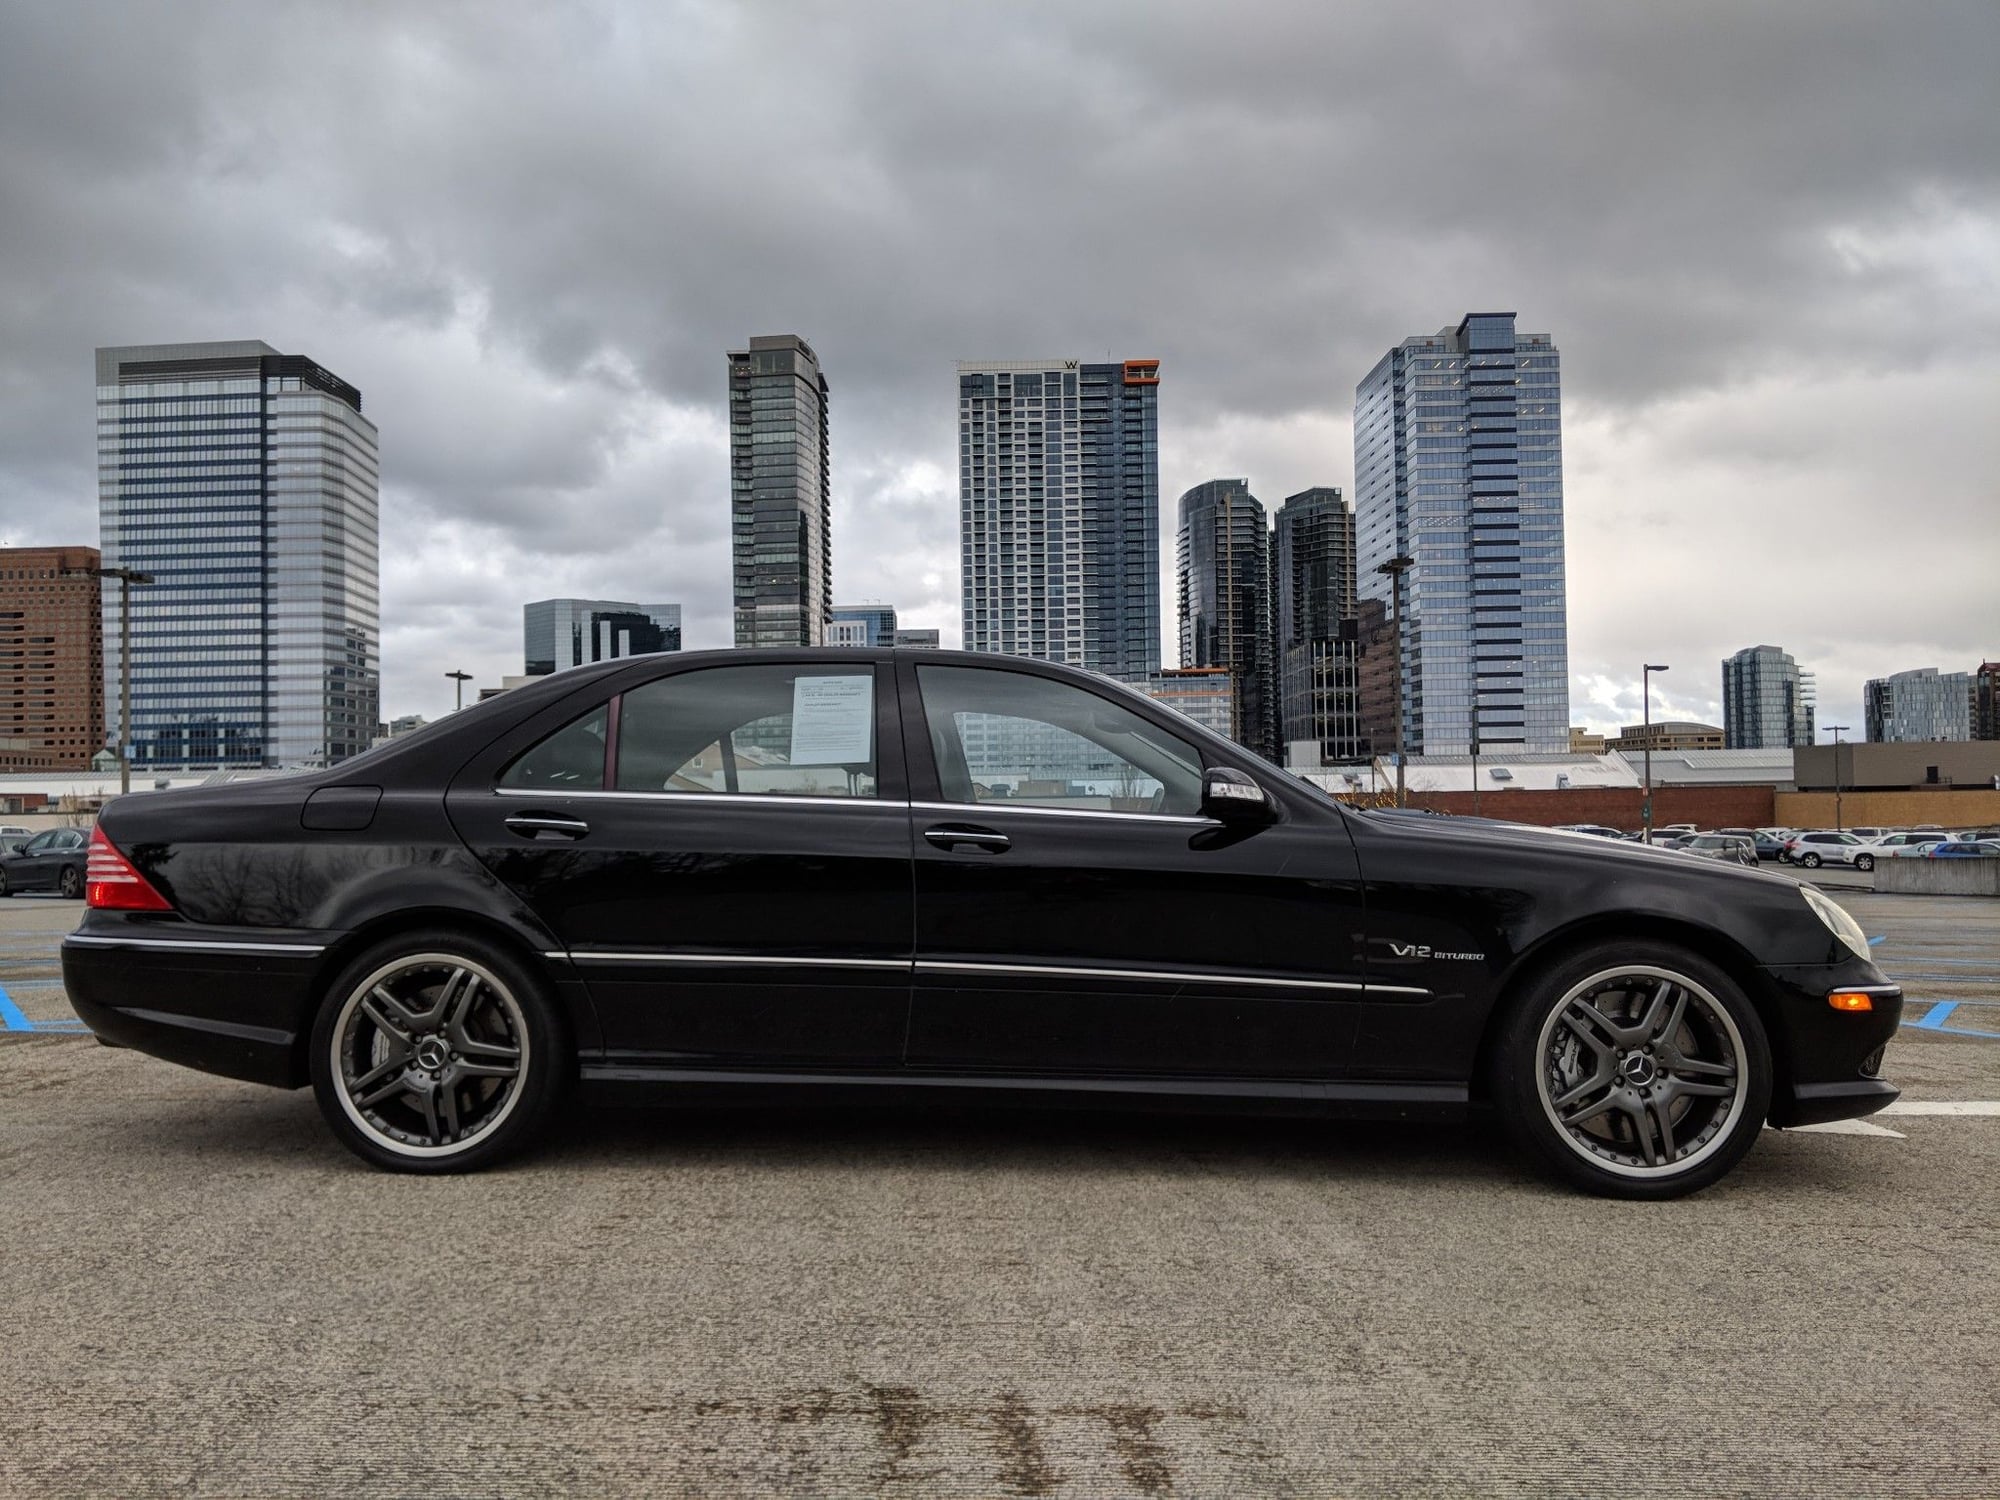 2003 - 2006 Mercedes-Benz S55 AMG - Wanted: 2003-2006 S55 or S500 Black Ext Only - Used - Black - San Jose, CA 95110, United States